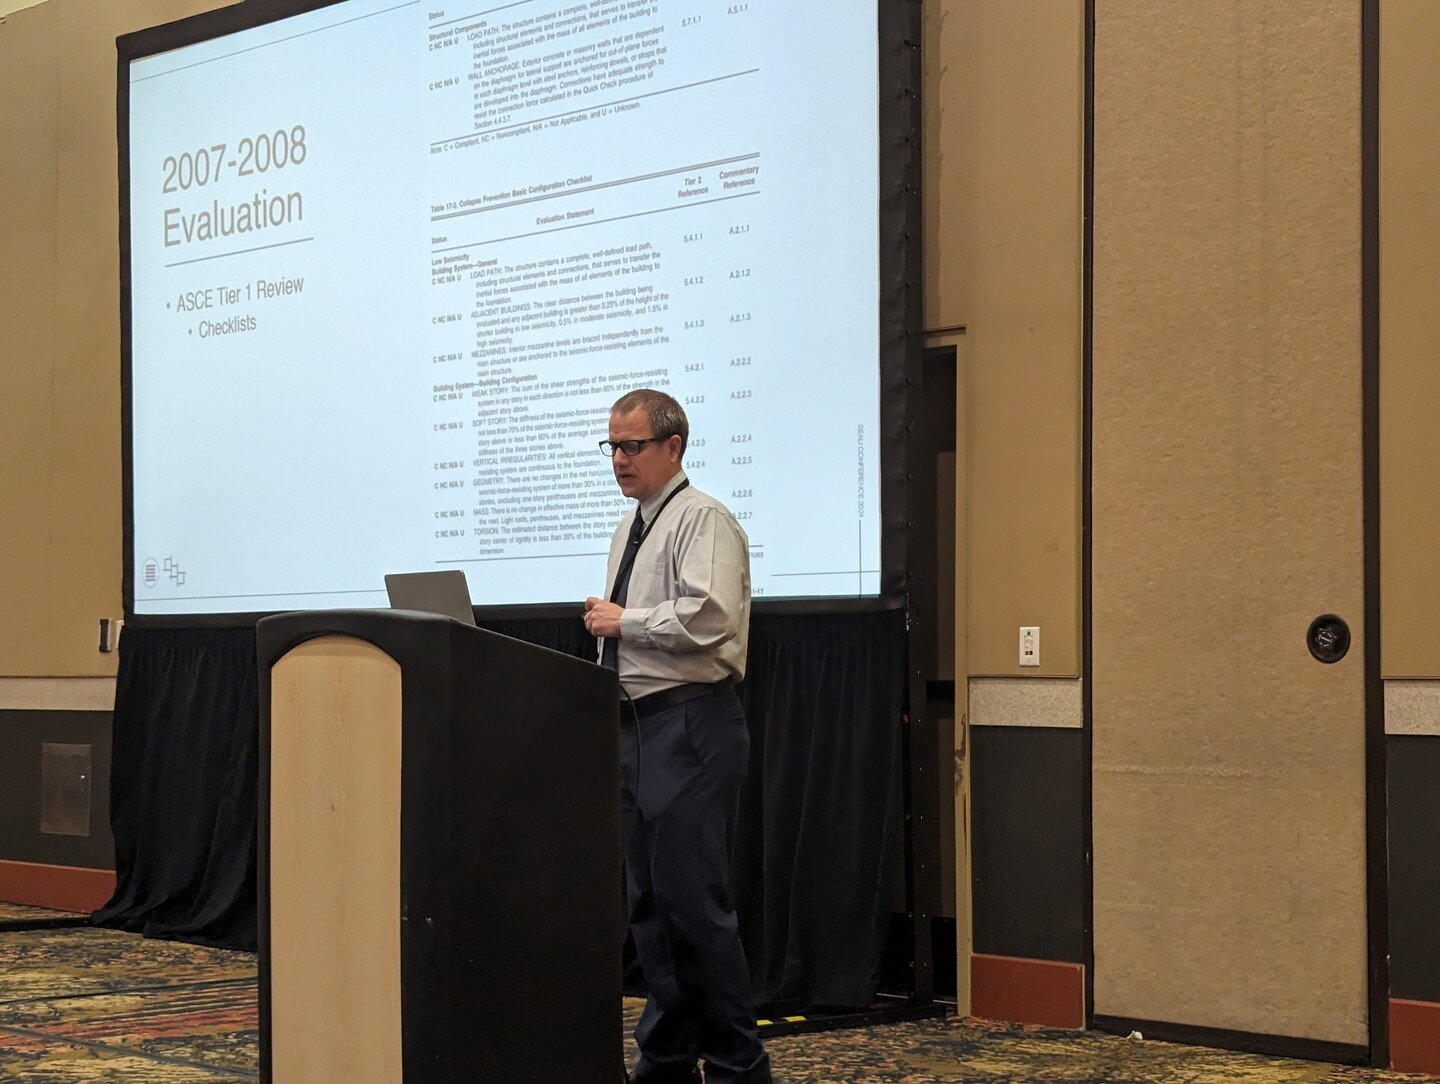 This week at the Structural Engineers Association of Utah annual conference, Zach Hansen and Matt McBride provided participates with an overview of using ASCE 41 for retrofit and analysis of unreinforced masonry buildings and showcased the newly comp